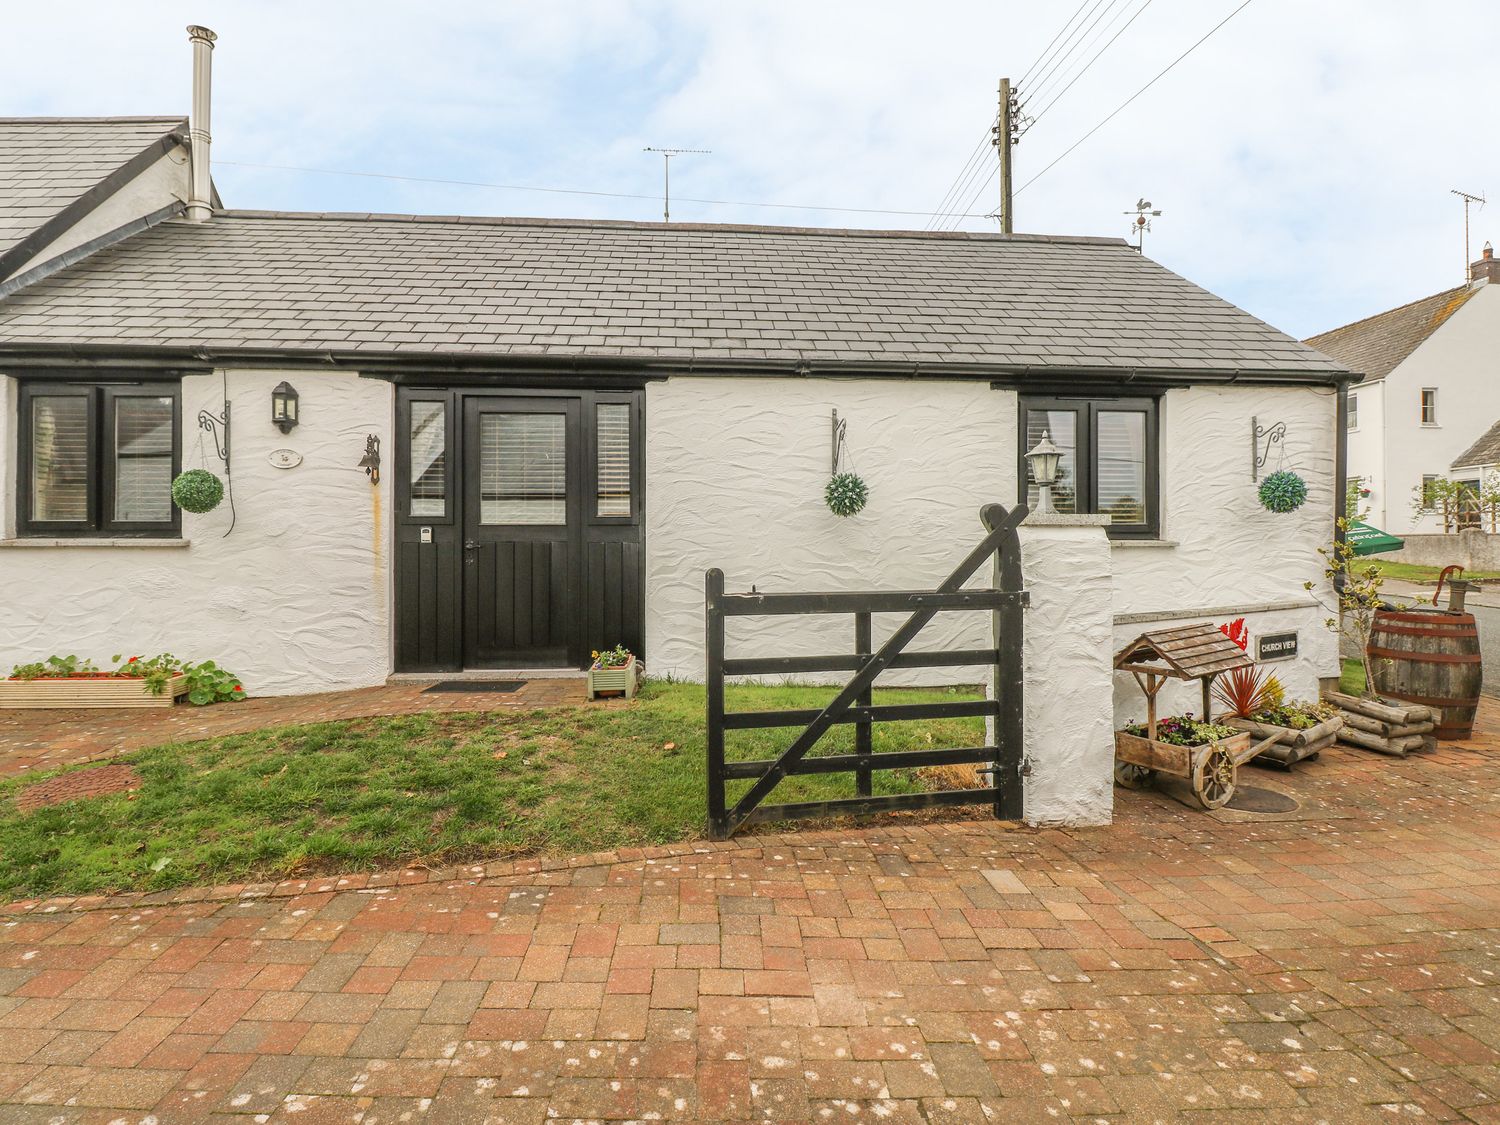 Cowslip Cottage - South Wales - 993727 - photo 1